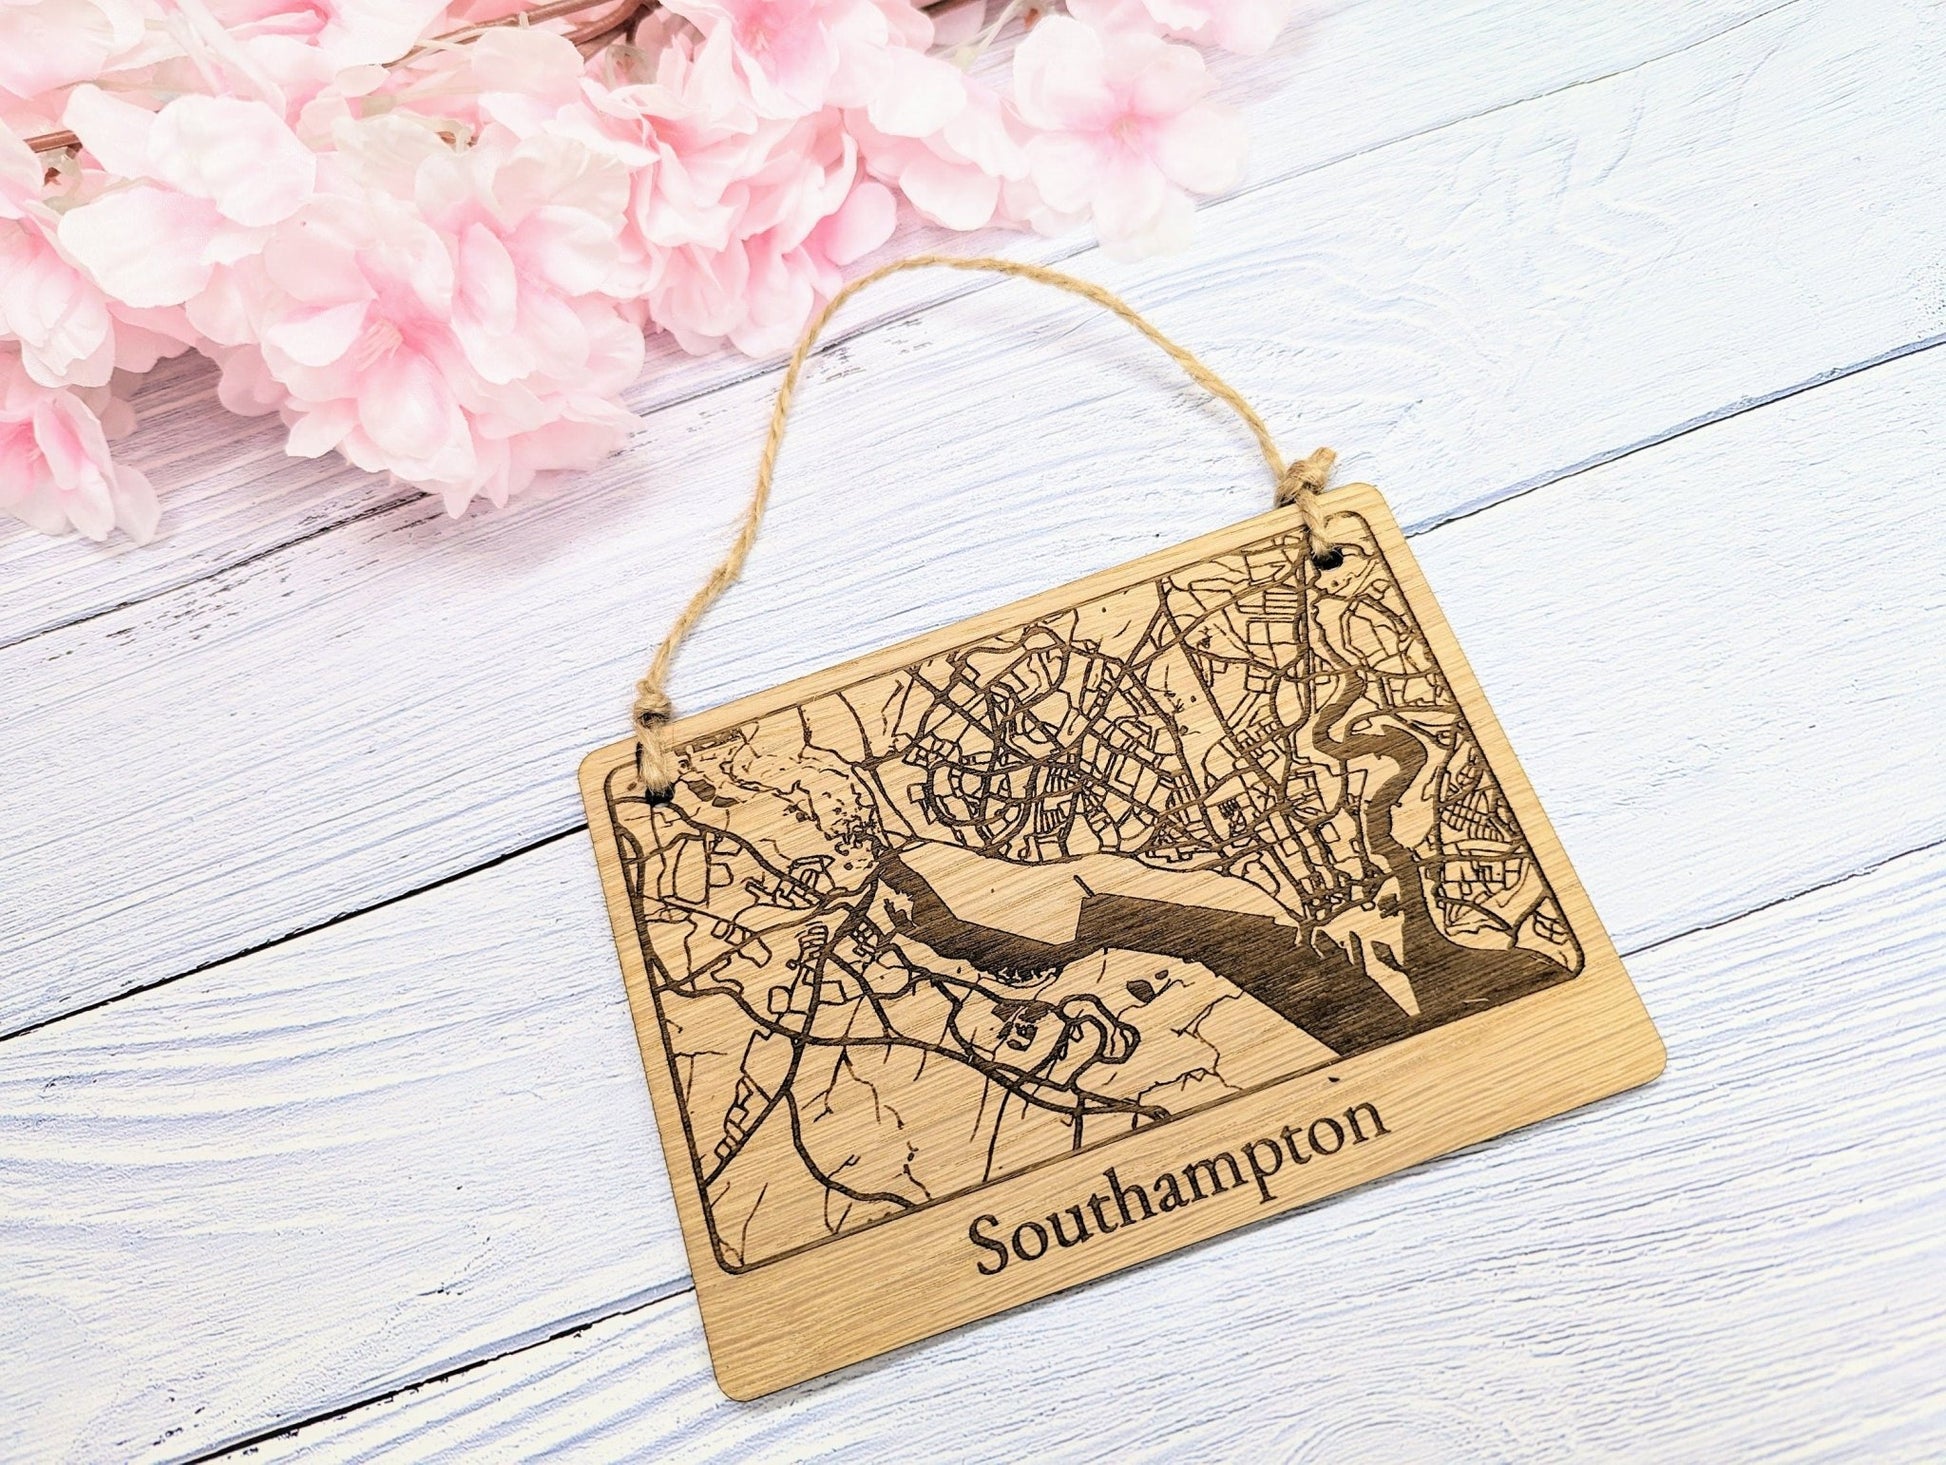 Southampton Map Wooden Wall Art - Unique City Map Decor for Home and Office - Available in 4 Sizes - CherryGroveCraft